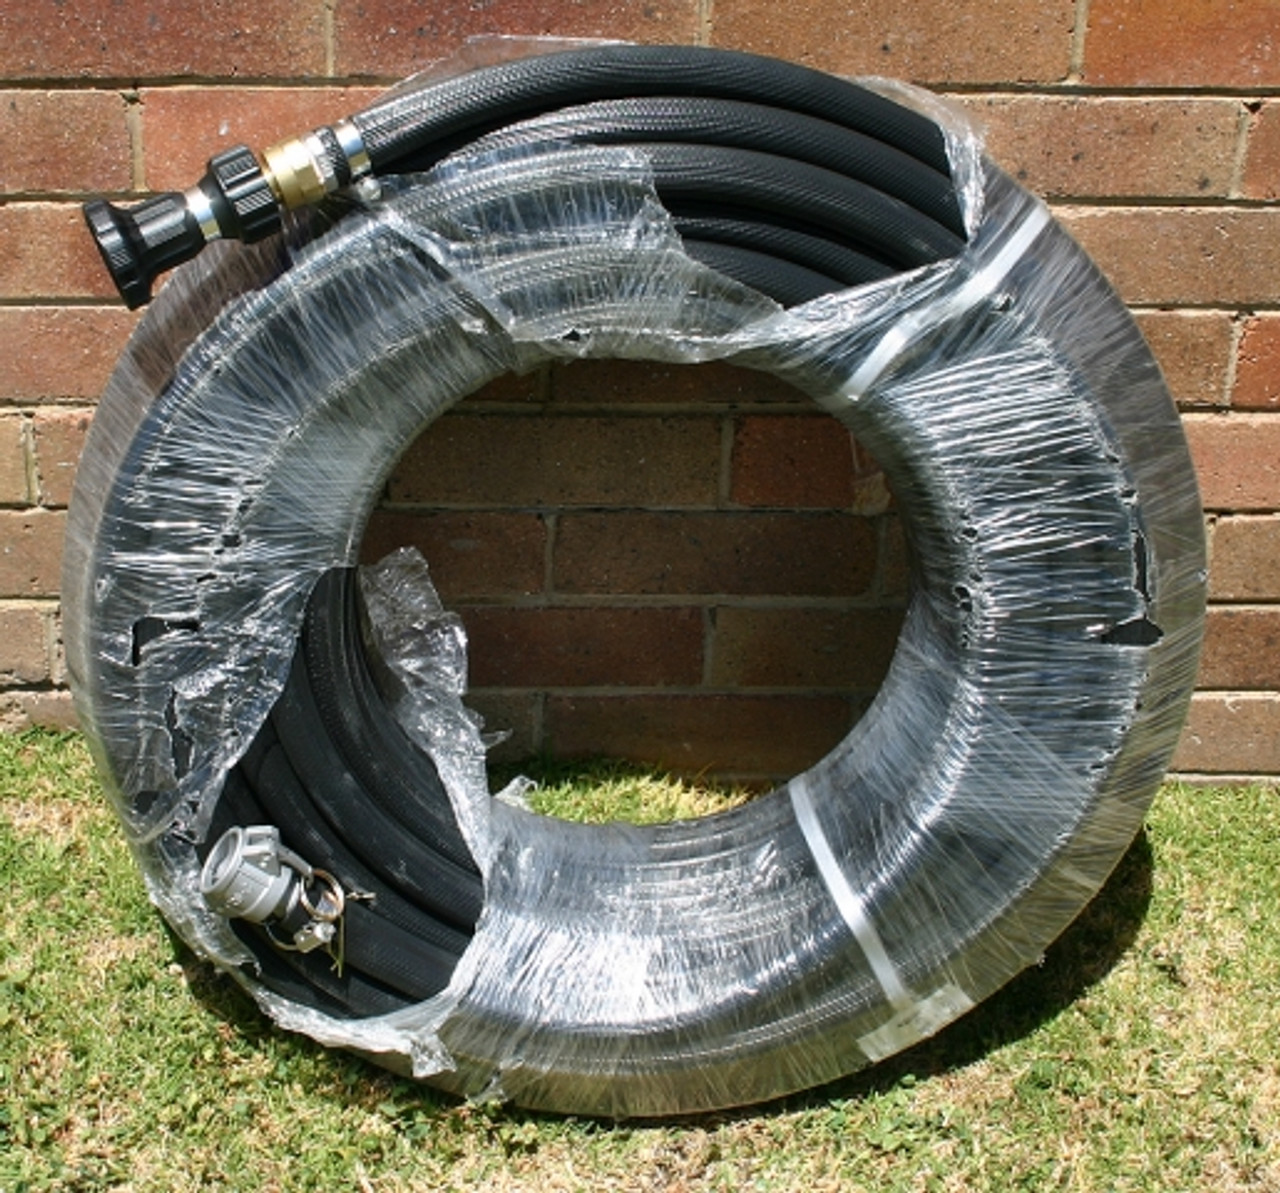 36m length of 1" Fire Hose (Australian Made) with camlock and Brass Fire Nozzle